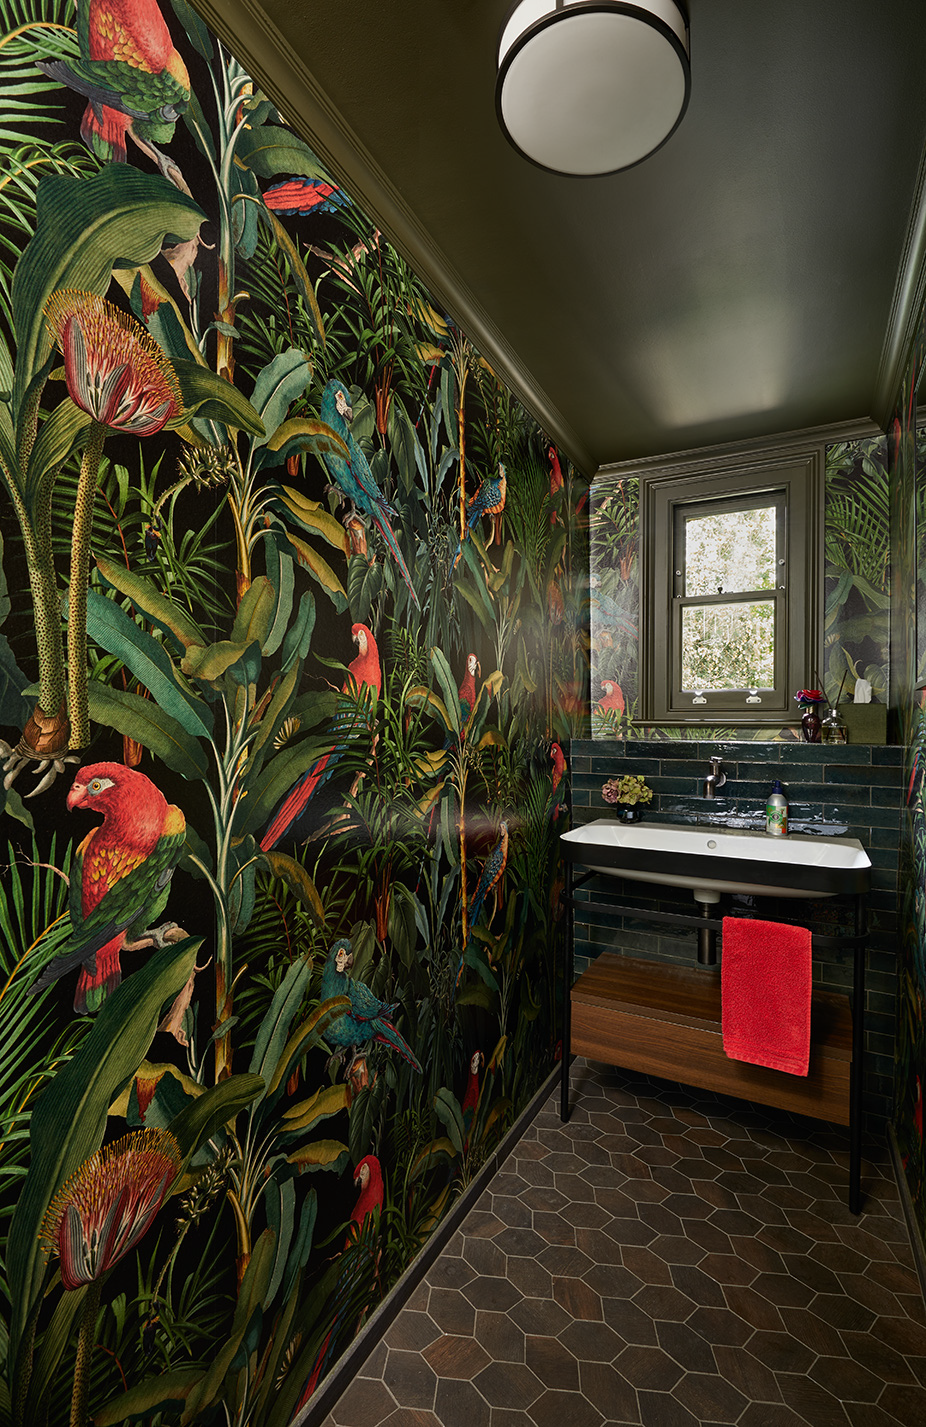 Guest cloakroom with bold parrot wallpaper